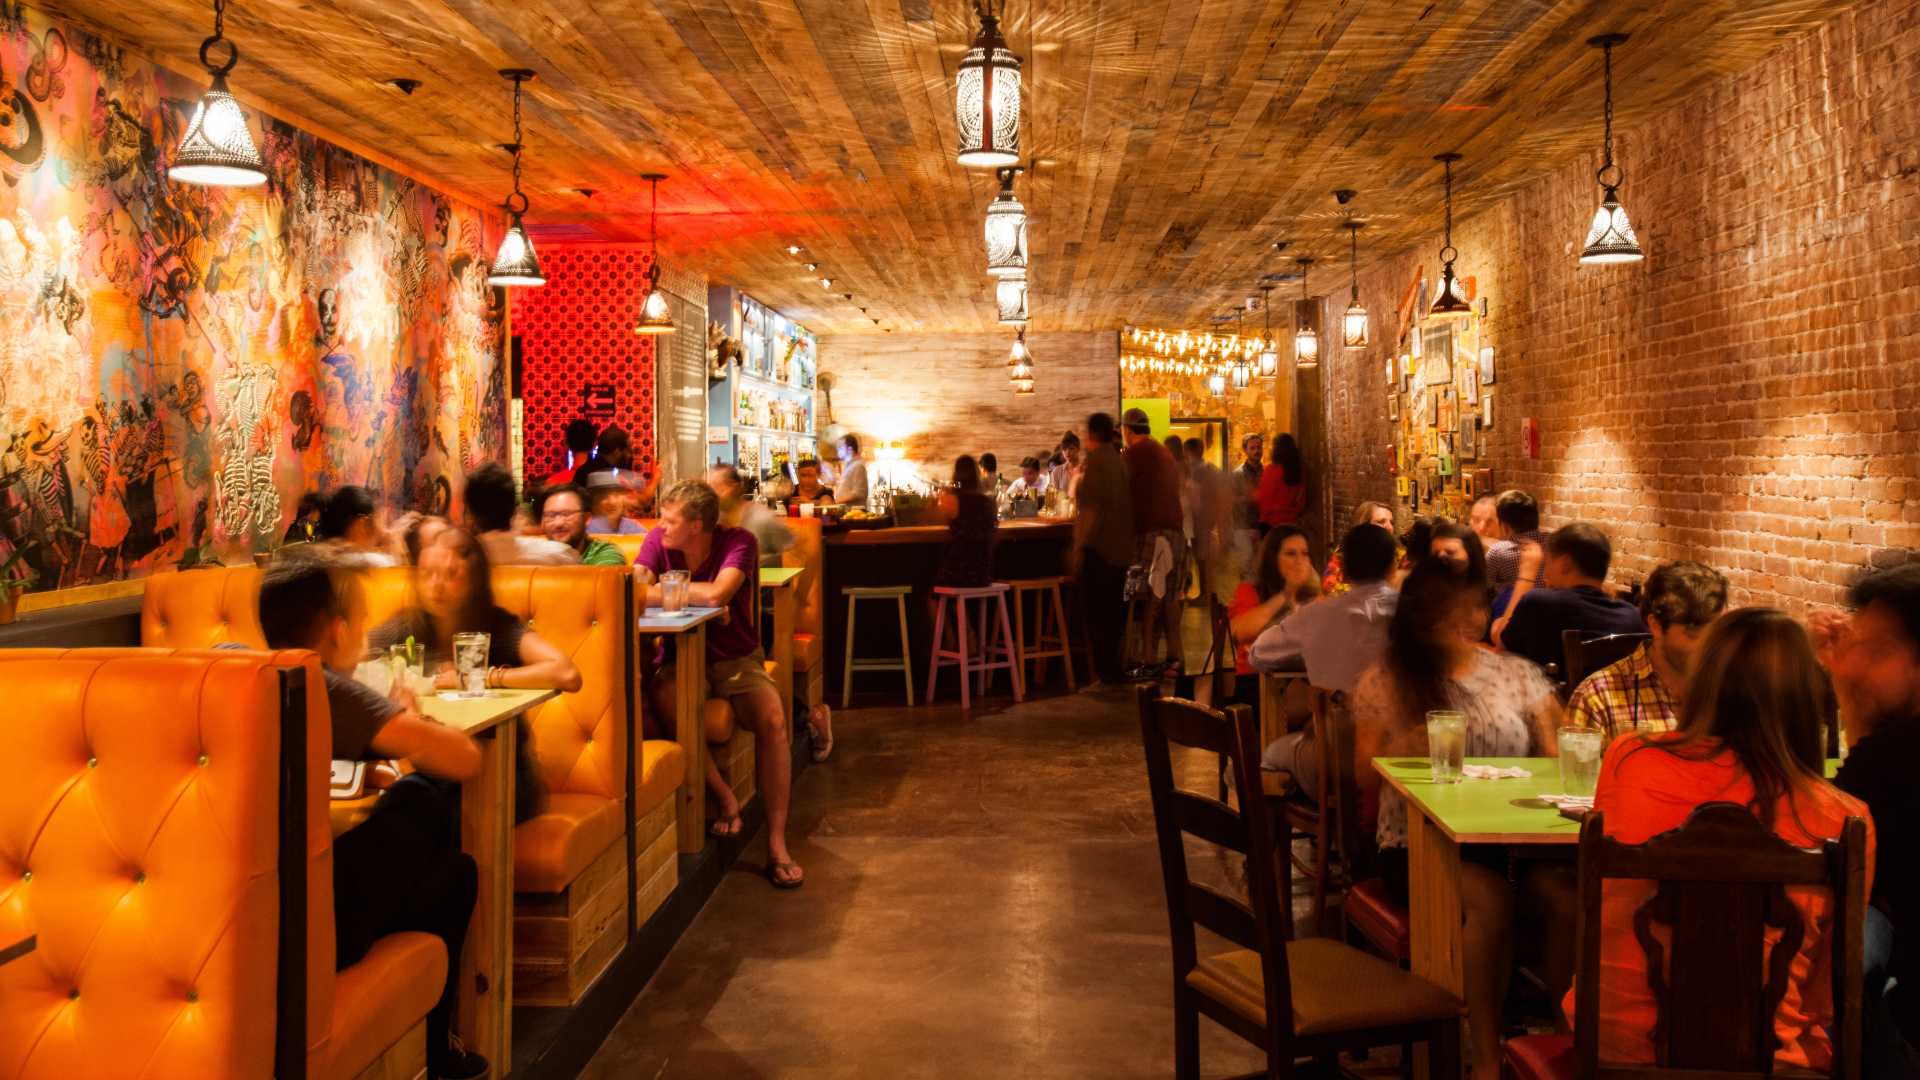 People sitting in booths inside The Pastry War in Houston